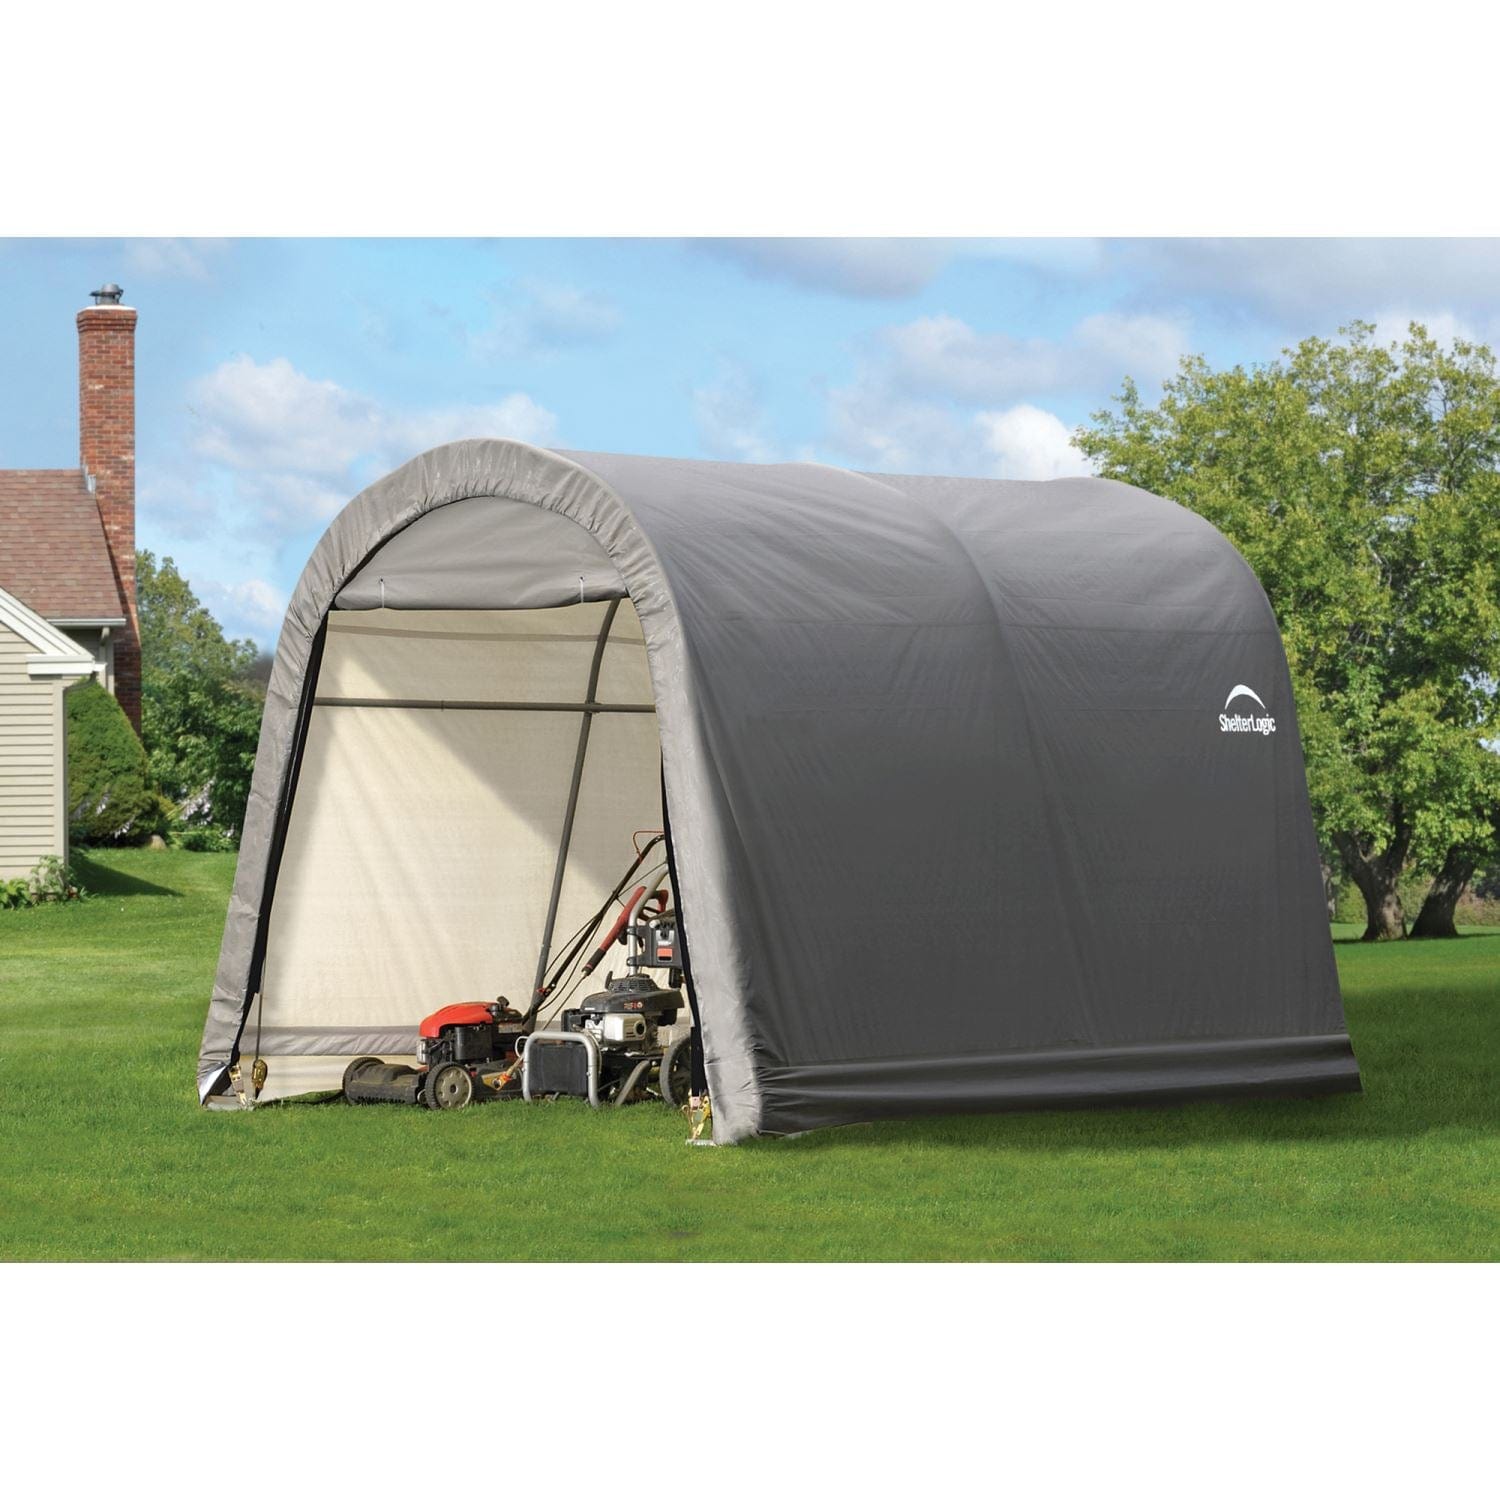 ShelterLogic Shed-in-a-Box Roundtop 10 x 10 x 8 ft. Gray - mygreenhousestore.com